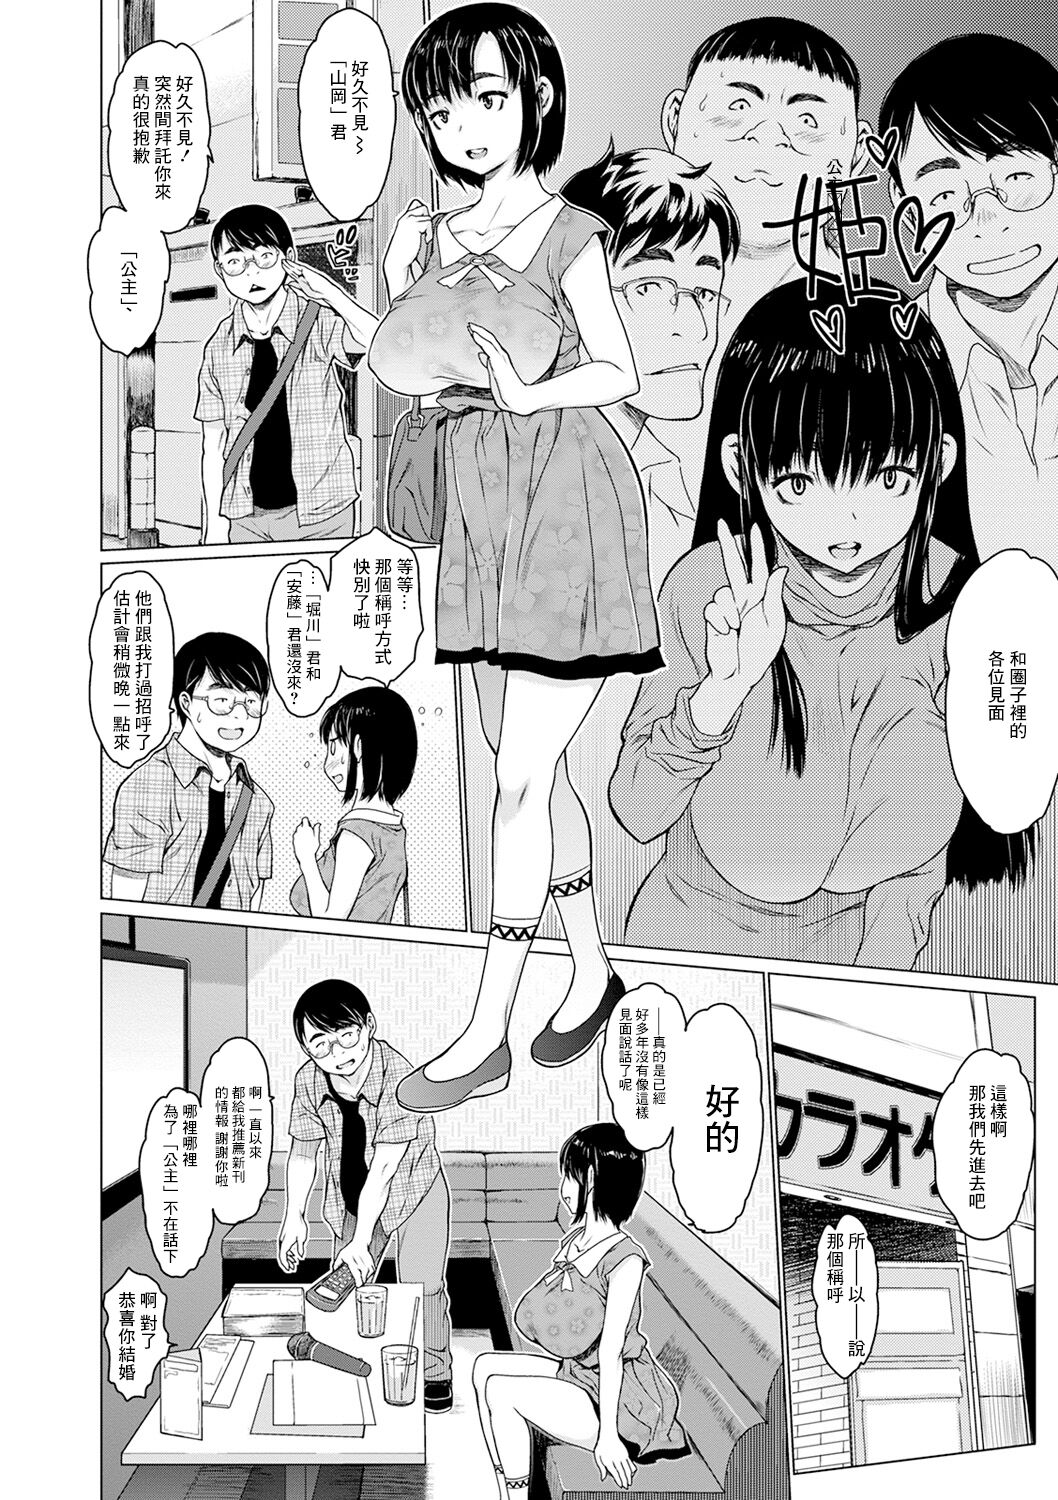 [Zero no Mono] Only once after (COMIC Shigekiteki SQUIRT!! Vol. 17) [Chinese] [Digital] [ゼロの者] Only once after (コミック刺激的SQUIRT!! Vol.17) [中国翻訳] [DL版]